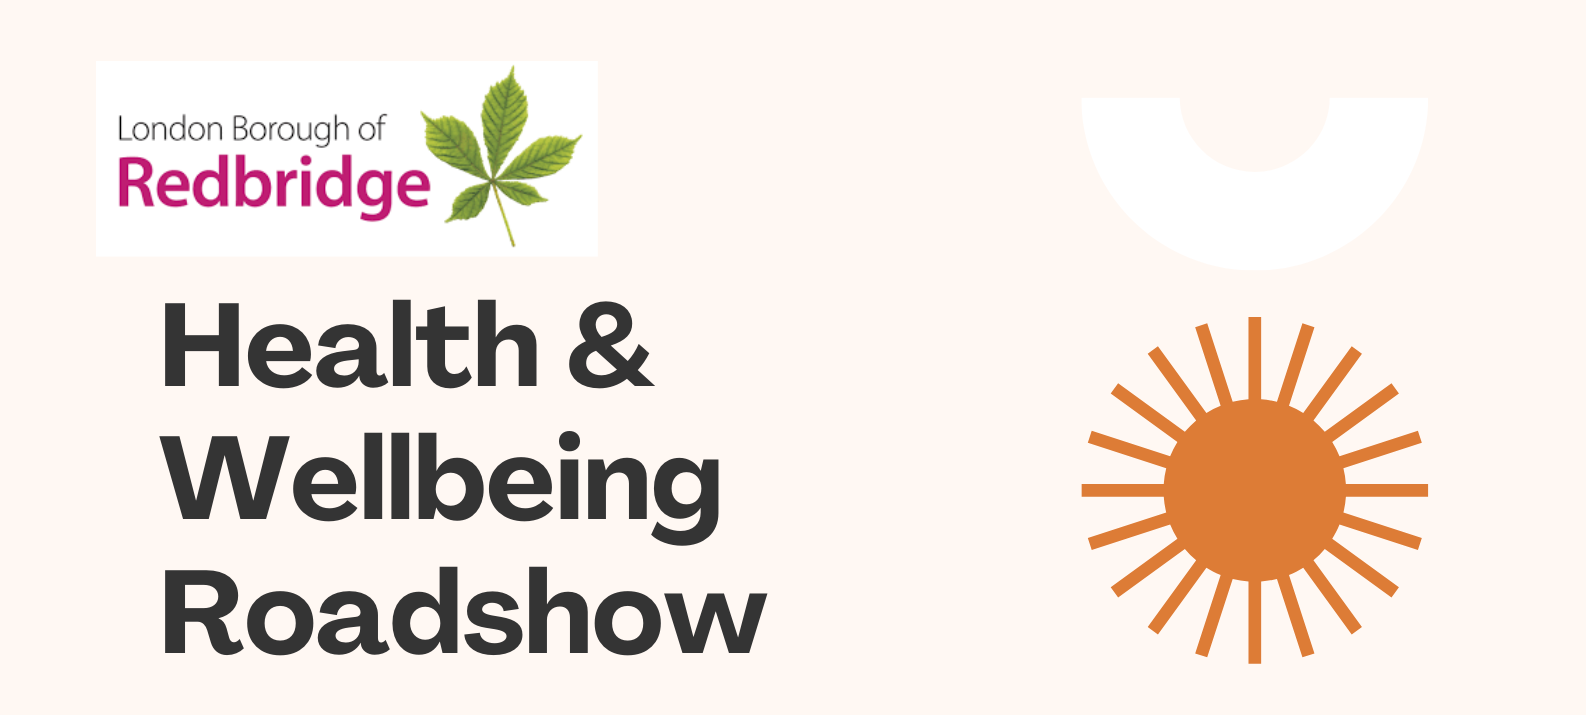 Health and wellbeing roadshows to commence this summer